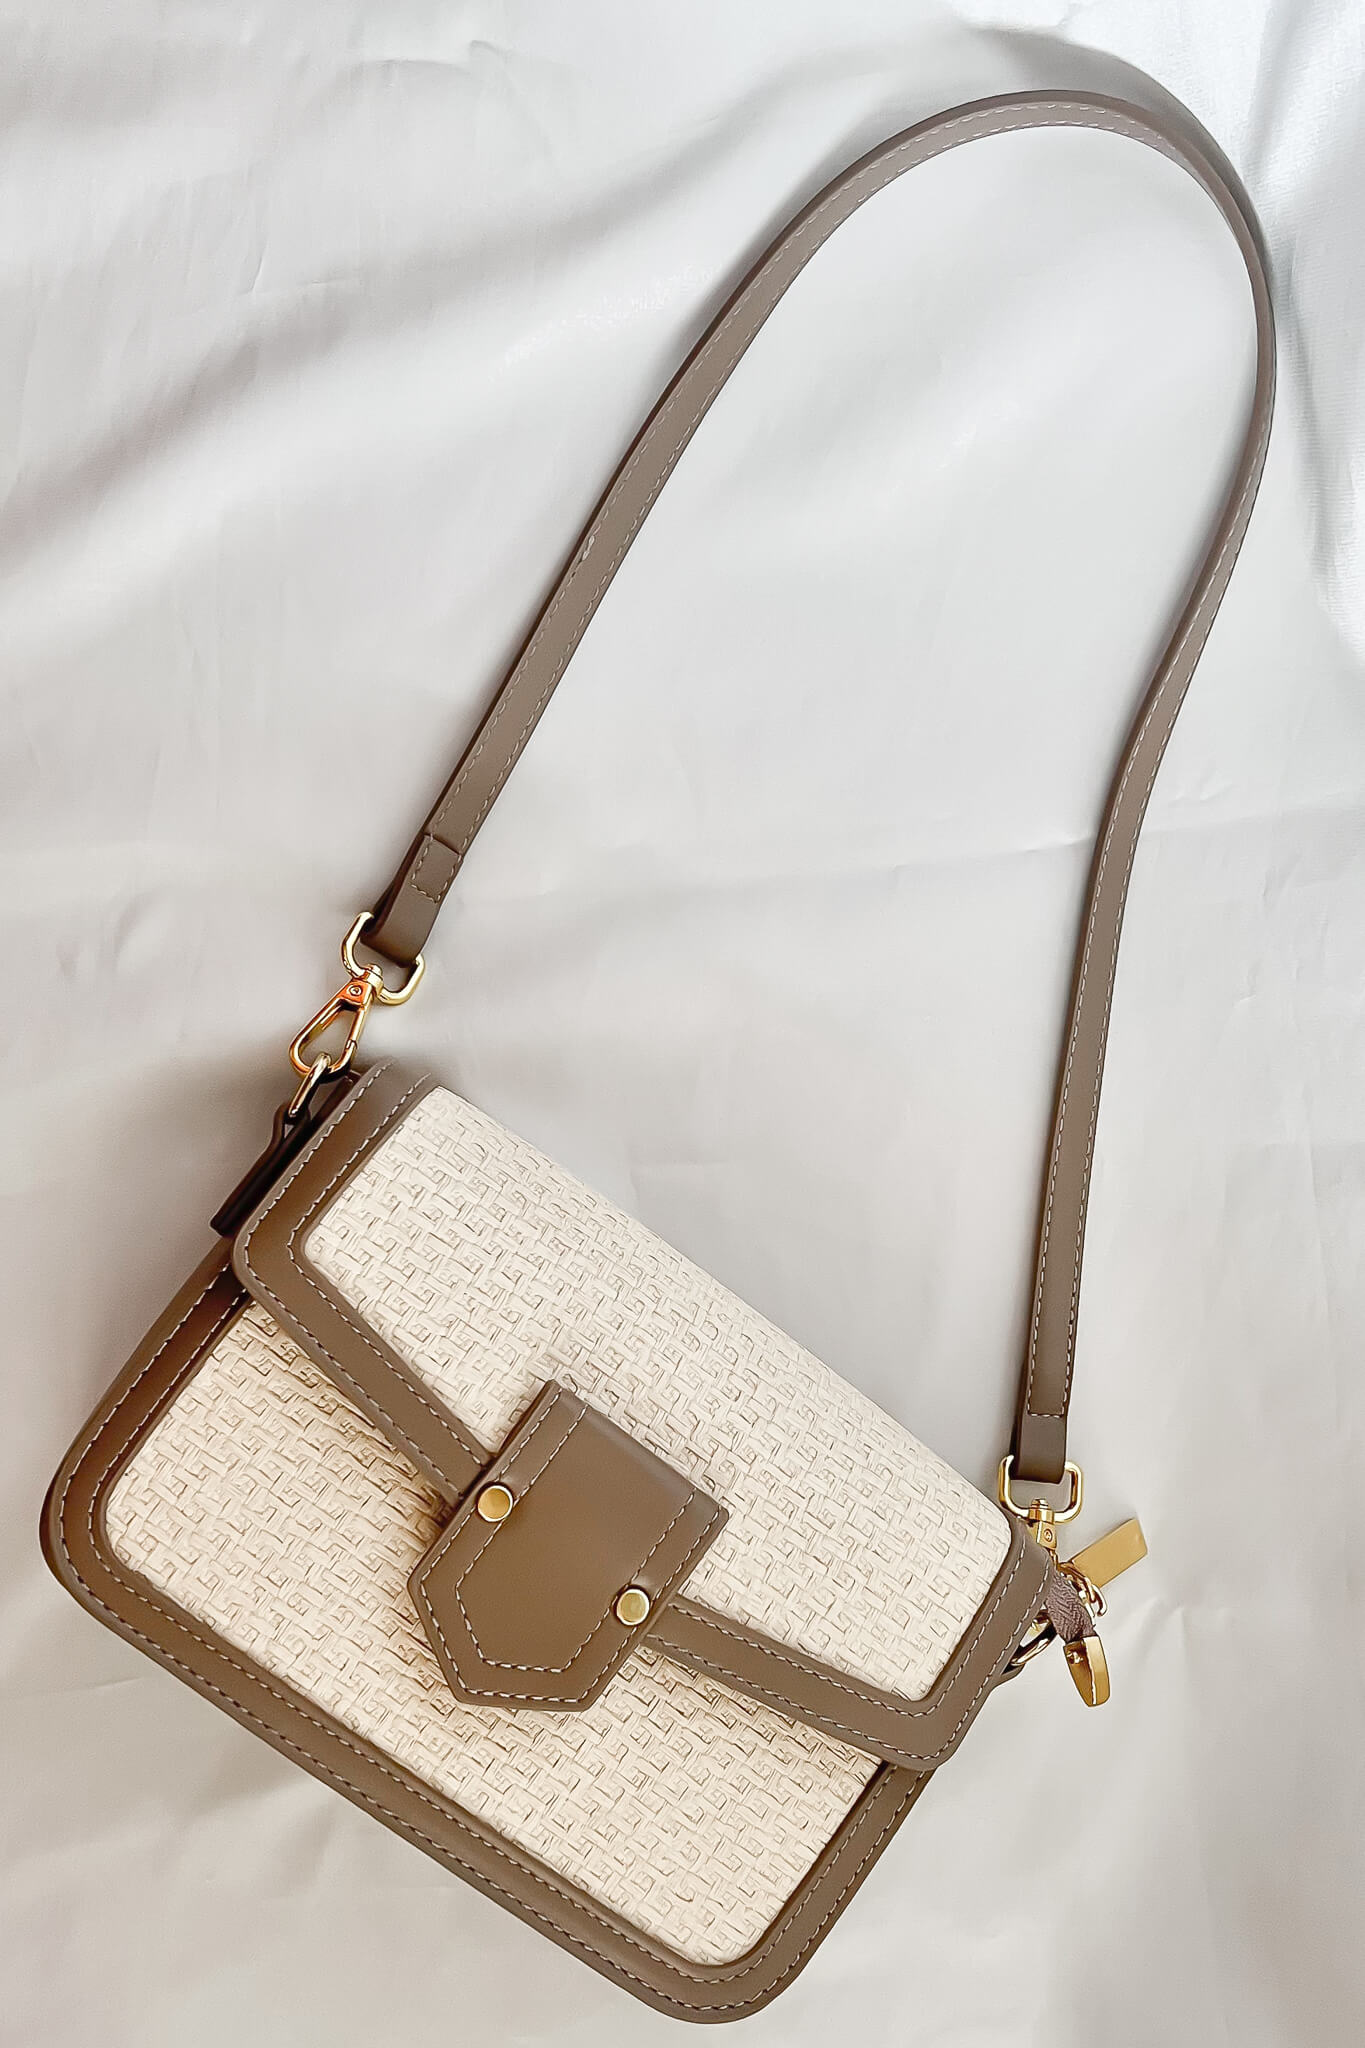 Multi-way carry flap bag with classy minimalist look